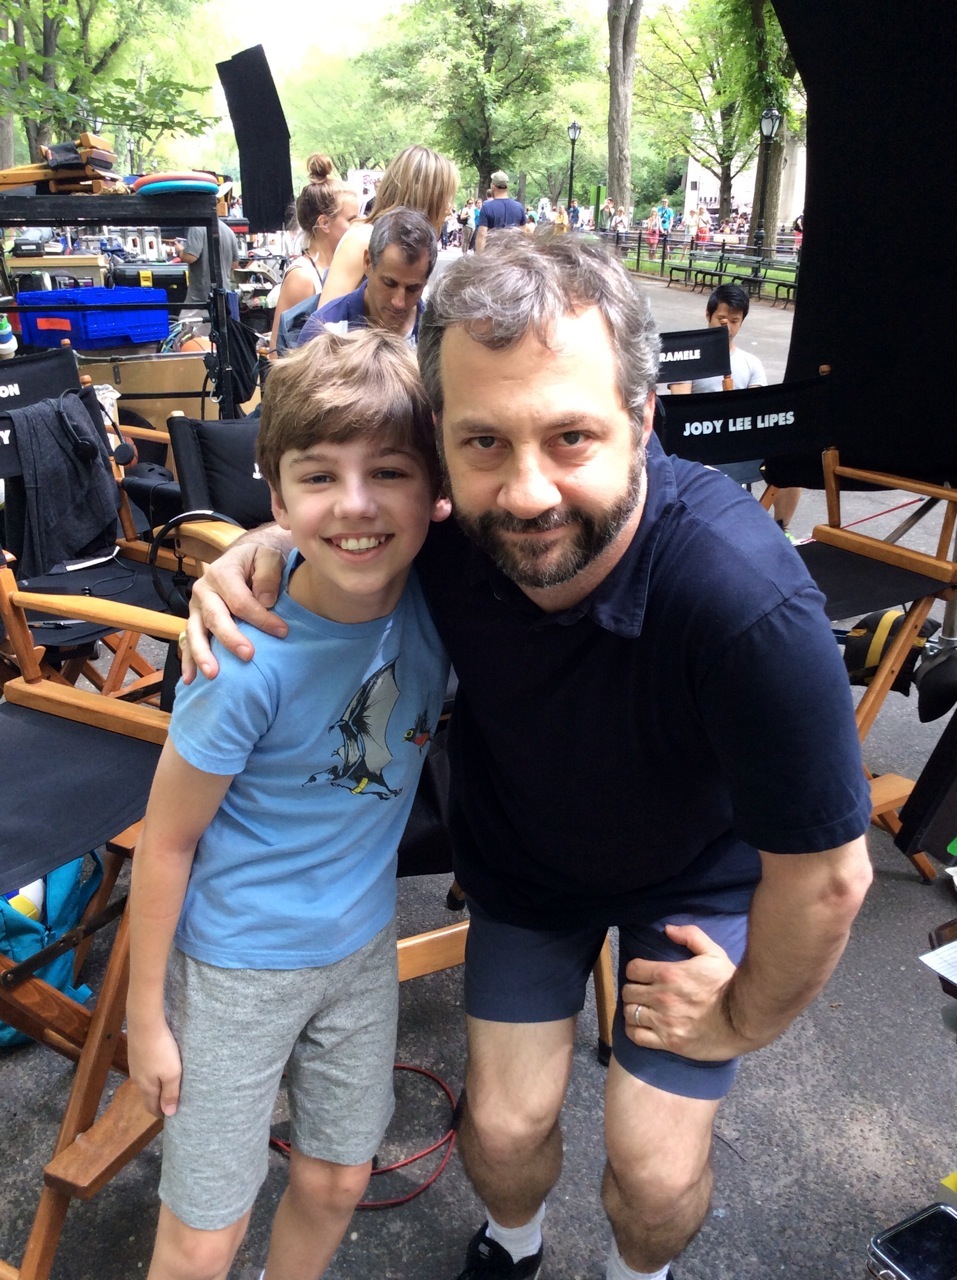 Director JUDD APATOW and Evan Brinkman on the set of TRAINWRECK.